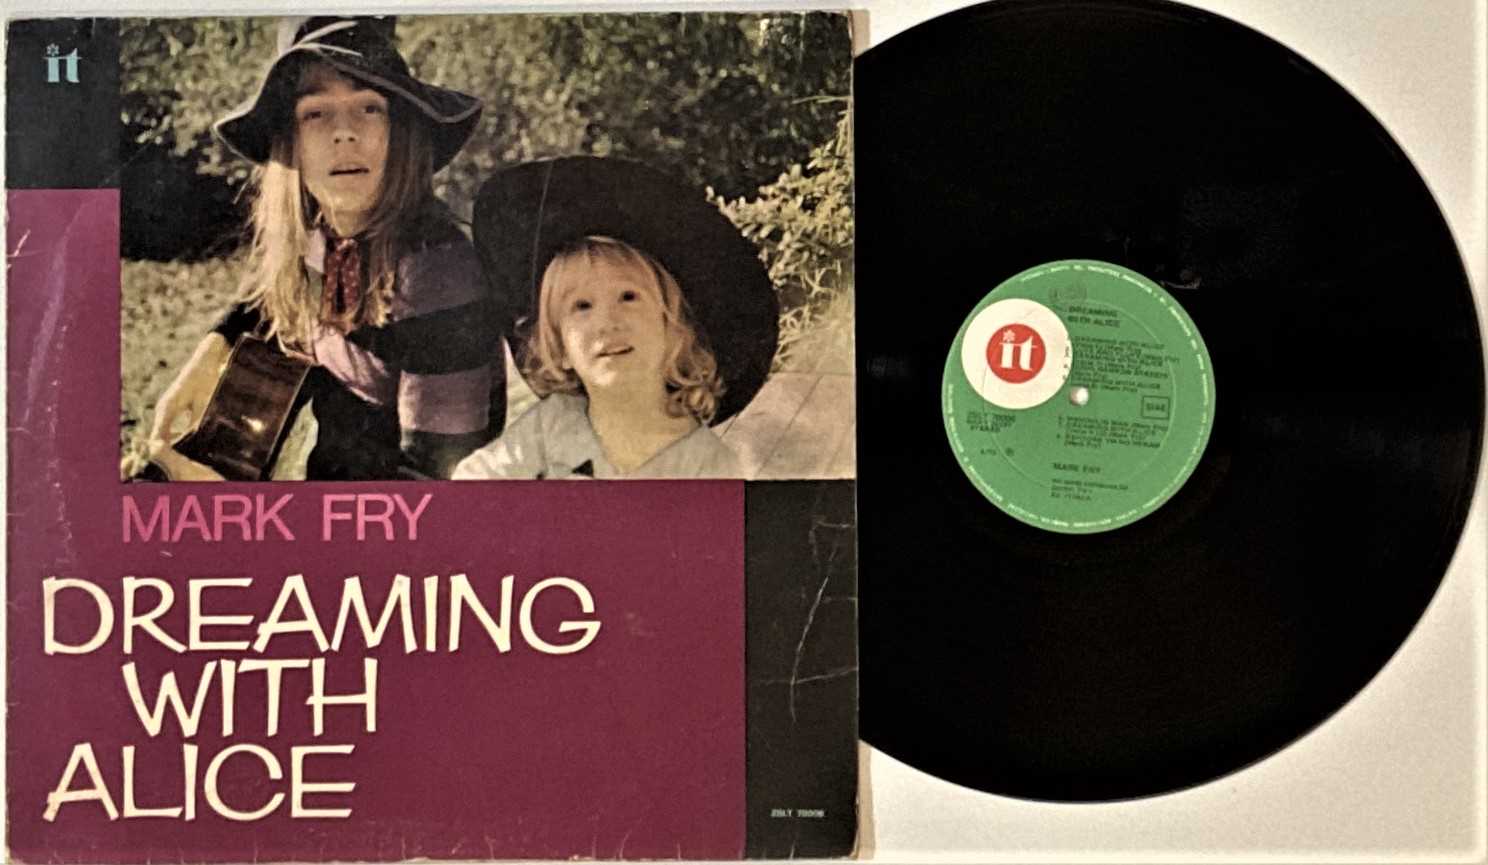 Lot 65 - MARK FRY - DREAMING WITH ALICE LP (ORIGINAL ITALIAN PRESSING - IT RECORDS ZSLT 70006)